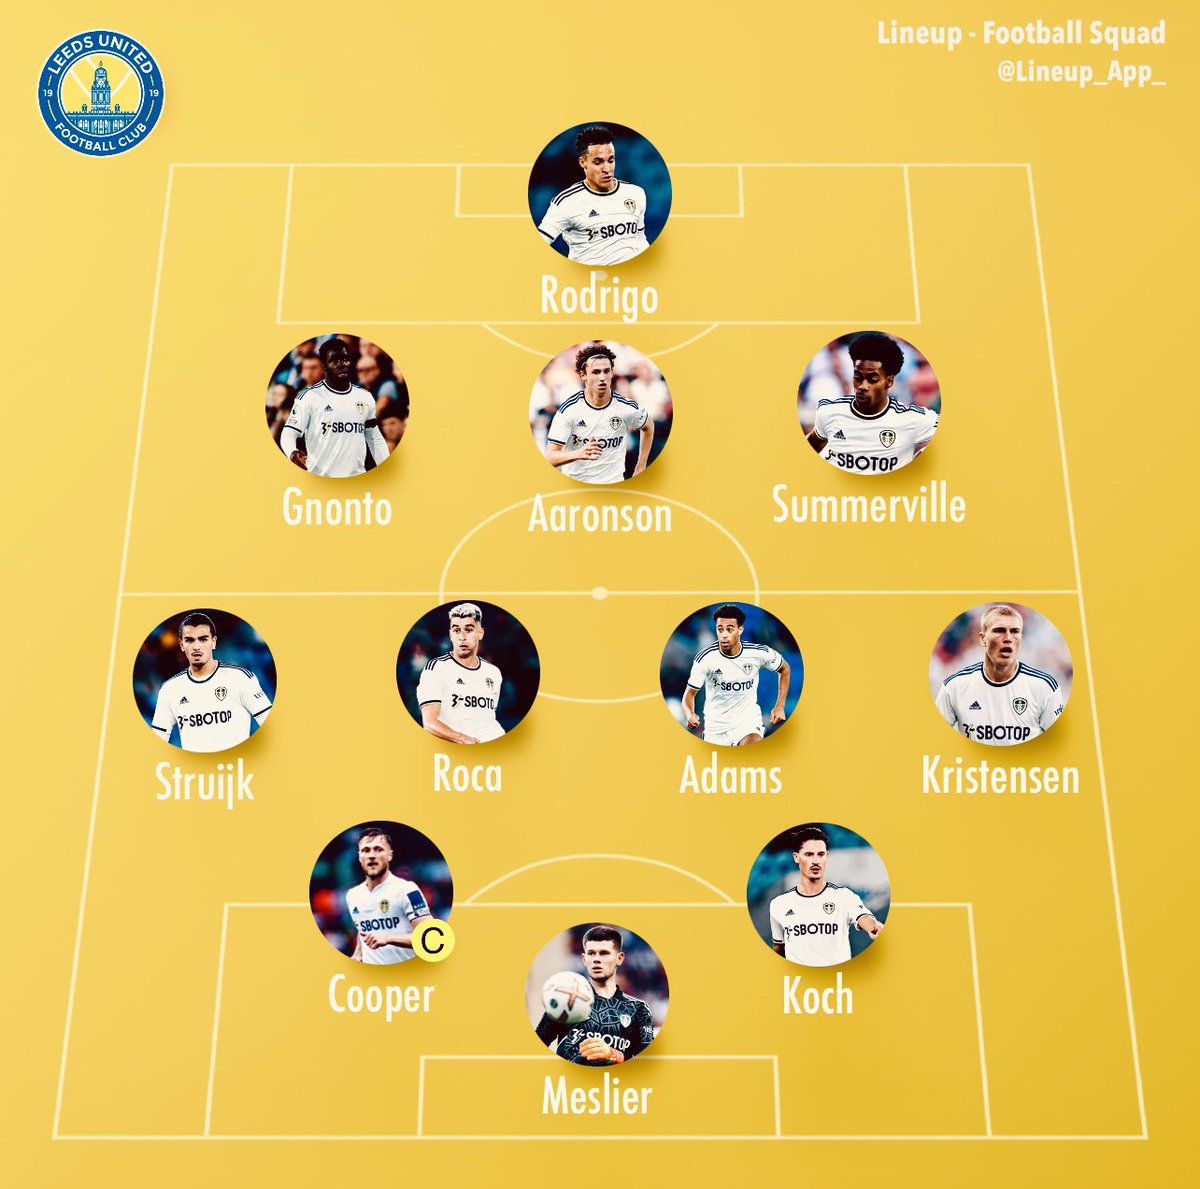 Starting XI to face Spurs, Gnonto with his first start for the club. A makeshift team of sorts but certainly not impossible that we might get something today if it goes our way. #lufc https://t.co/e7JHcxeKOe